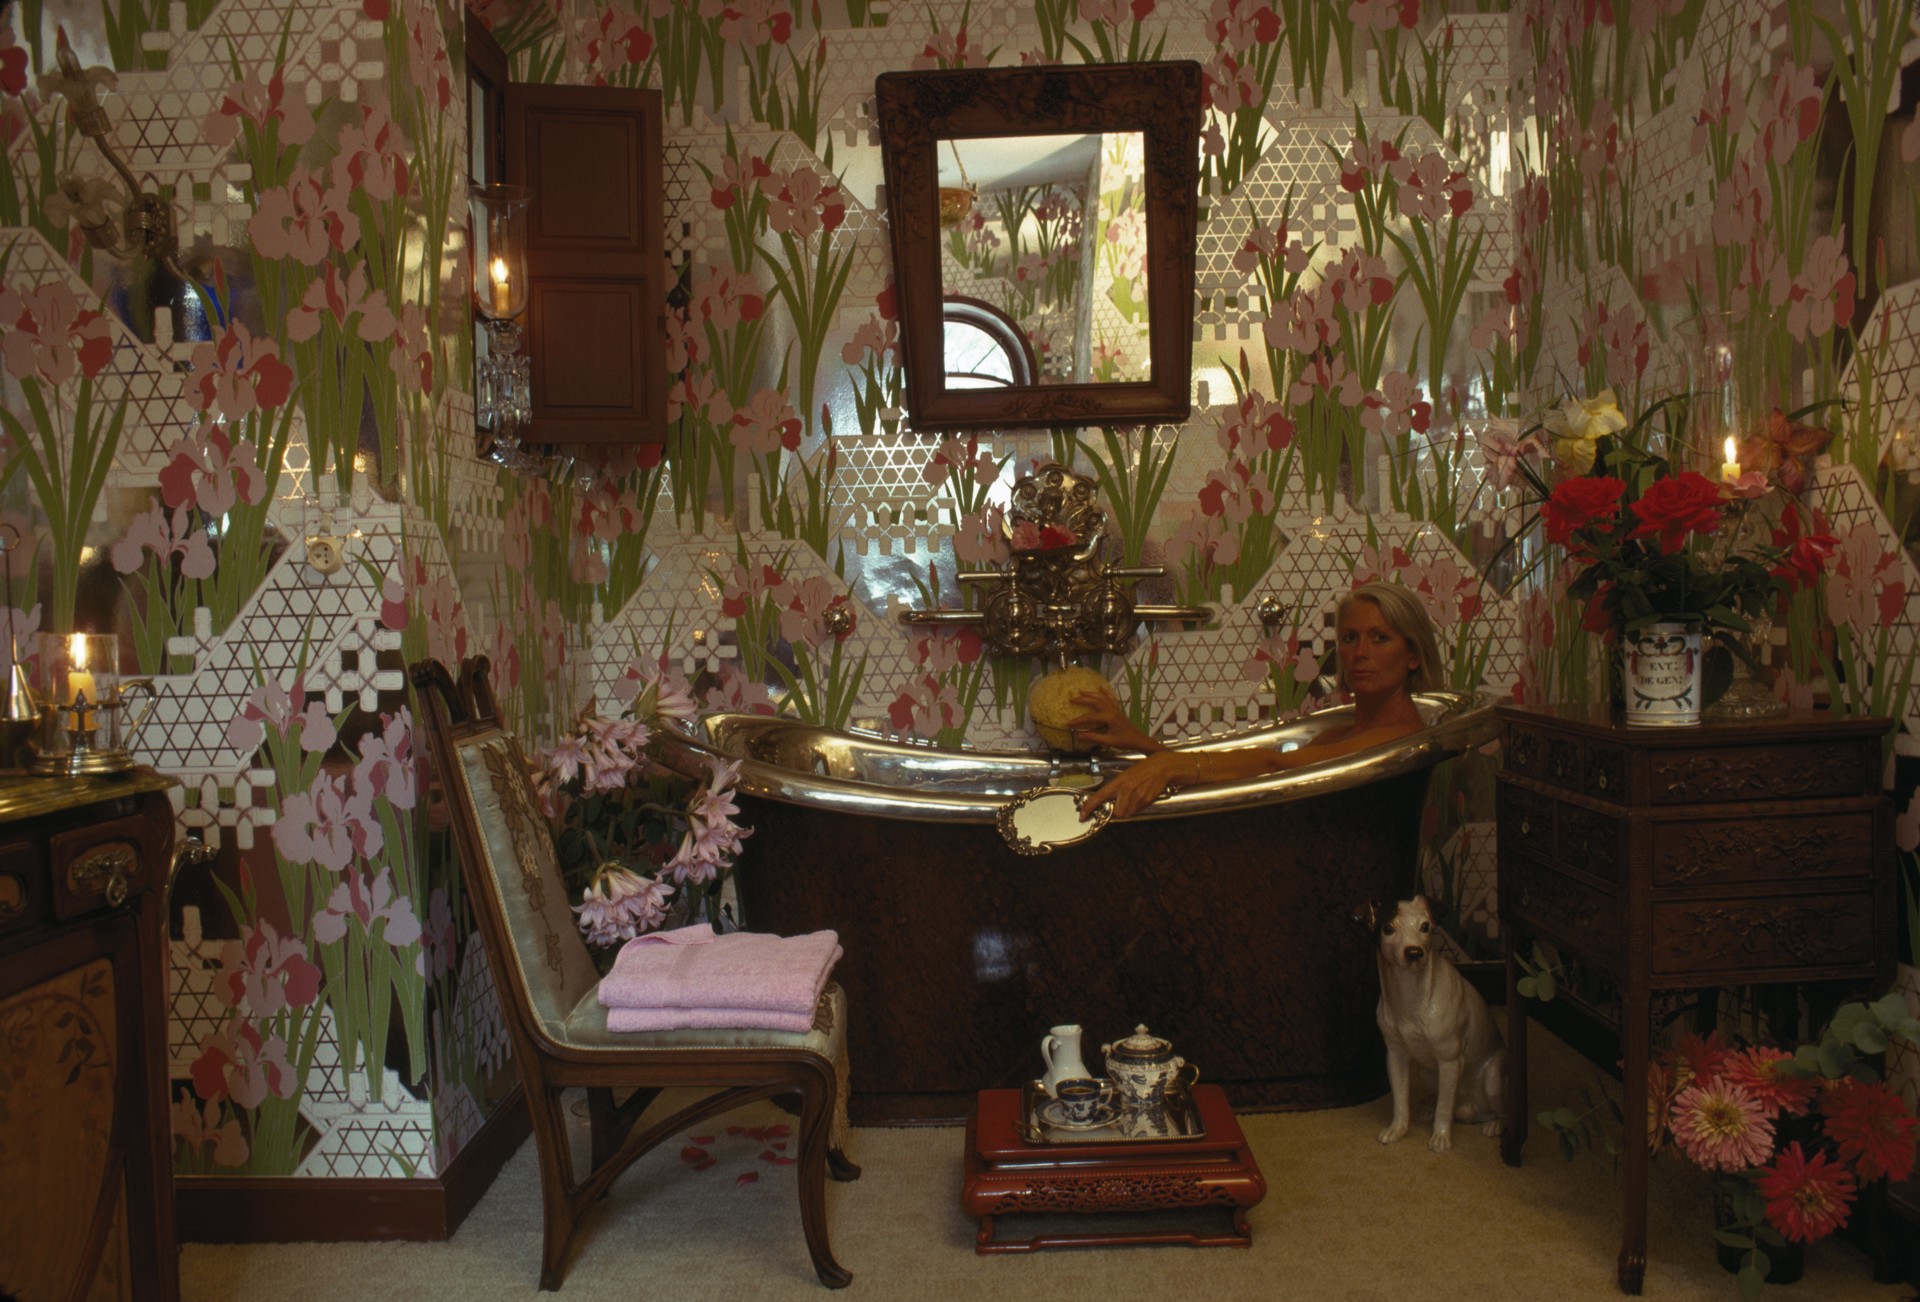 French Bath by Slim Aarons